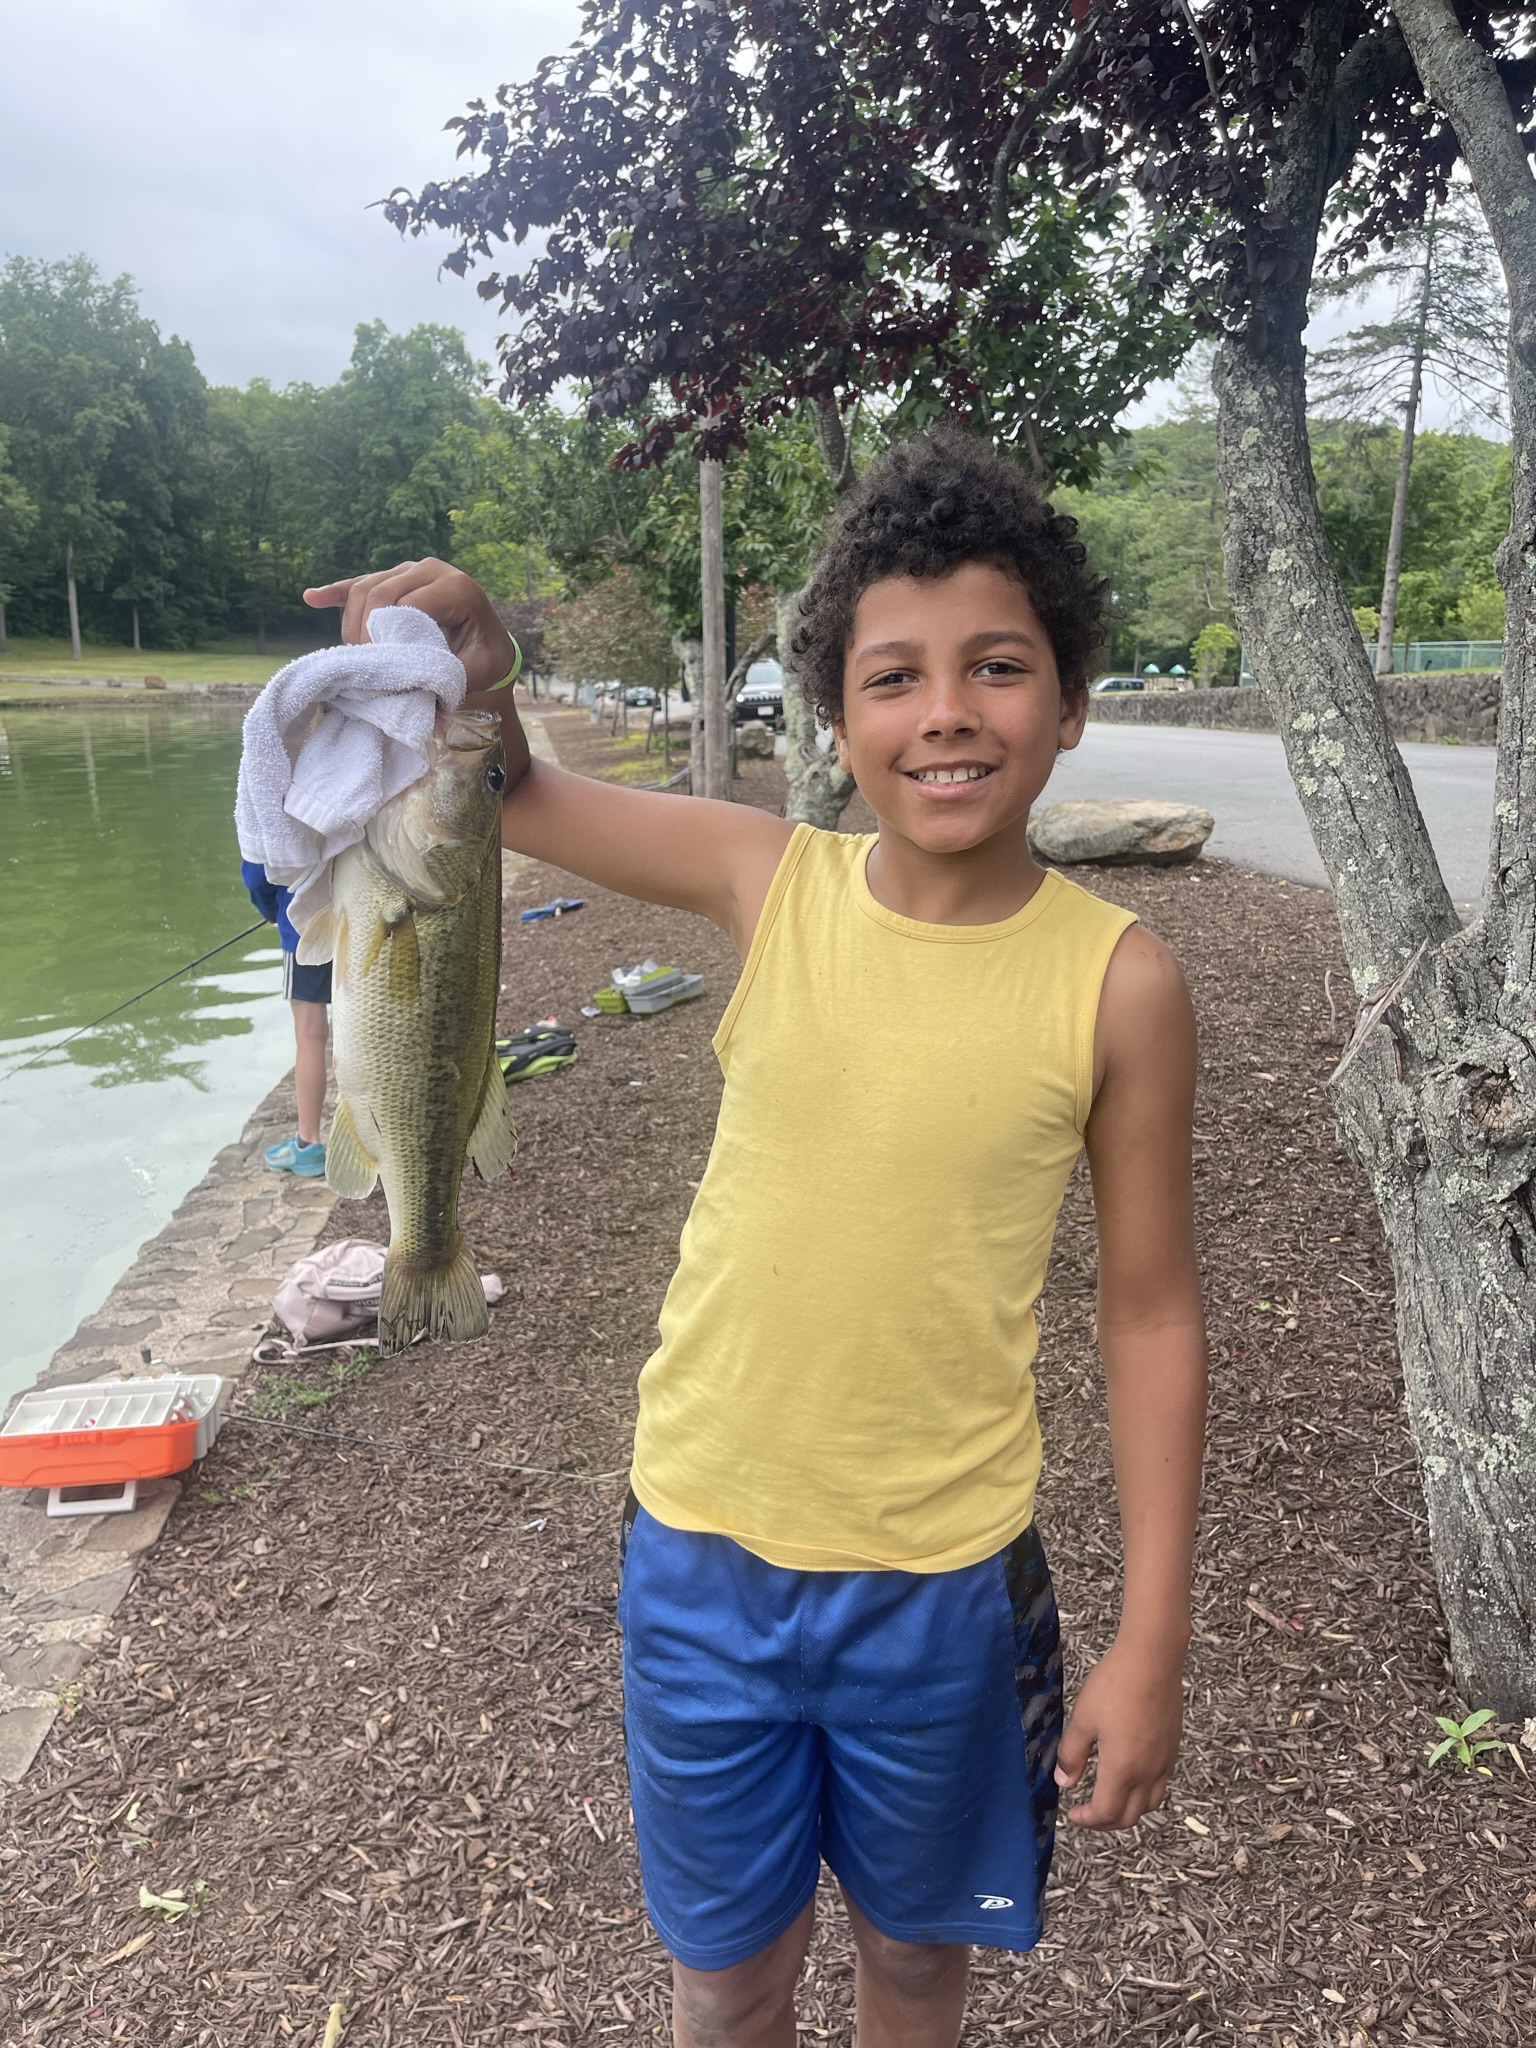 A boy at Mountain Mist Fishing Camp proudly showing the large fish he caught